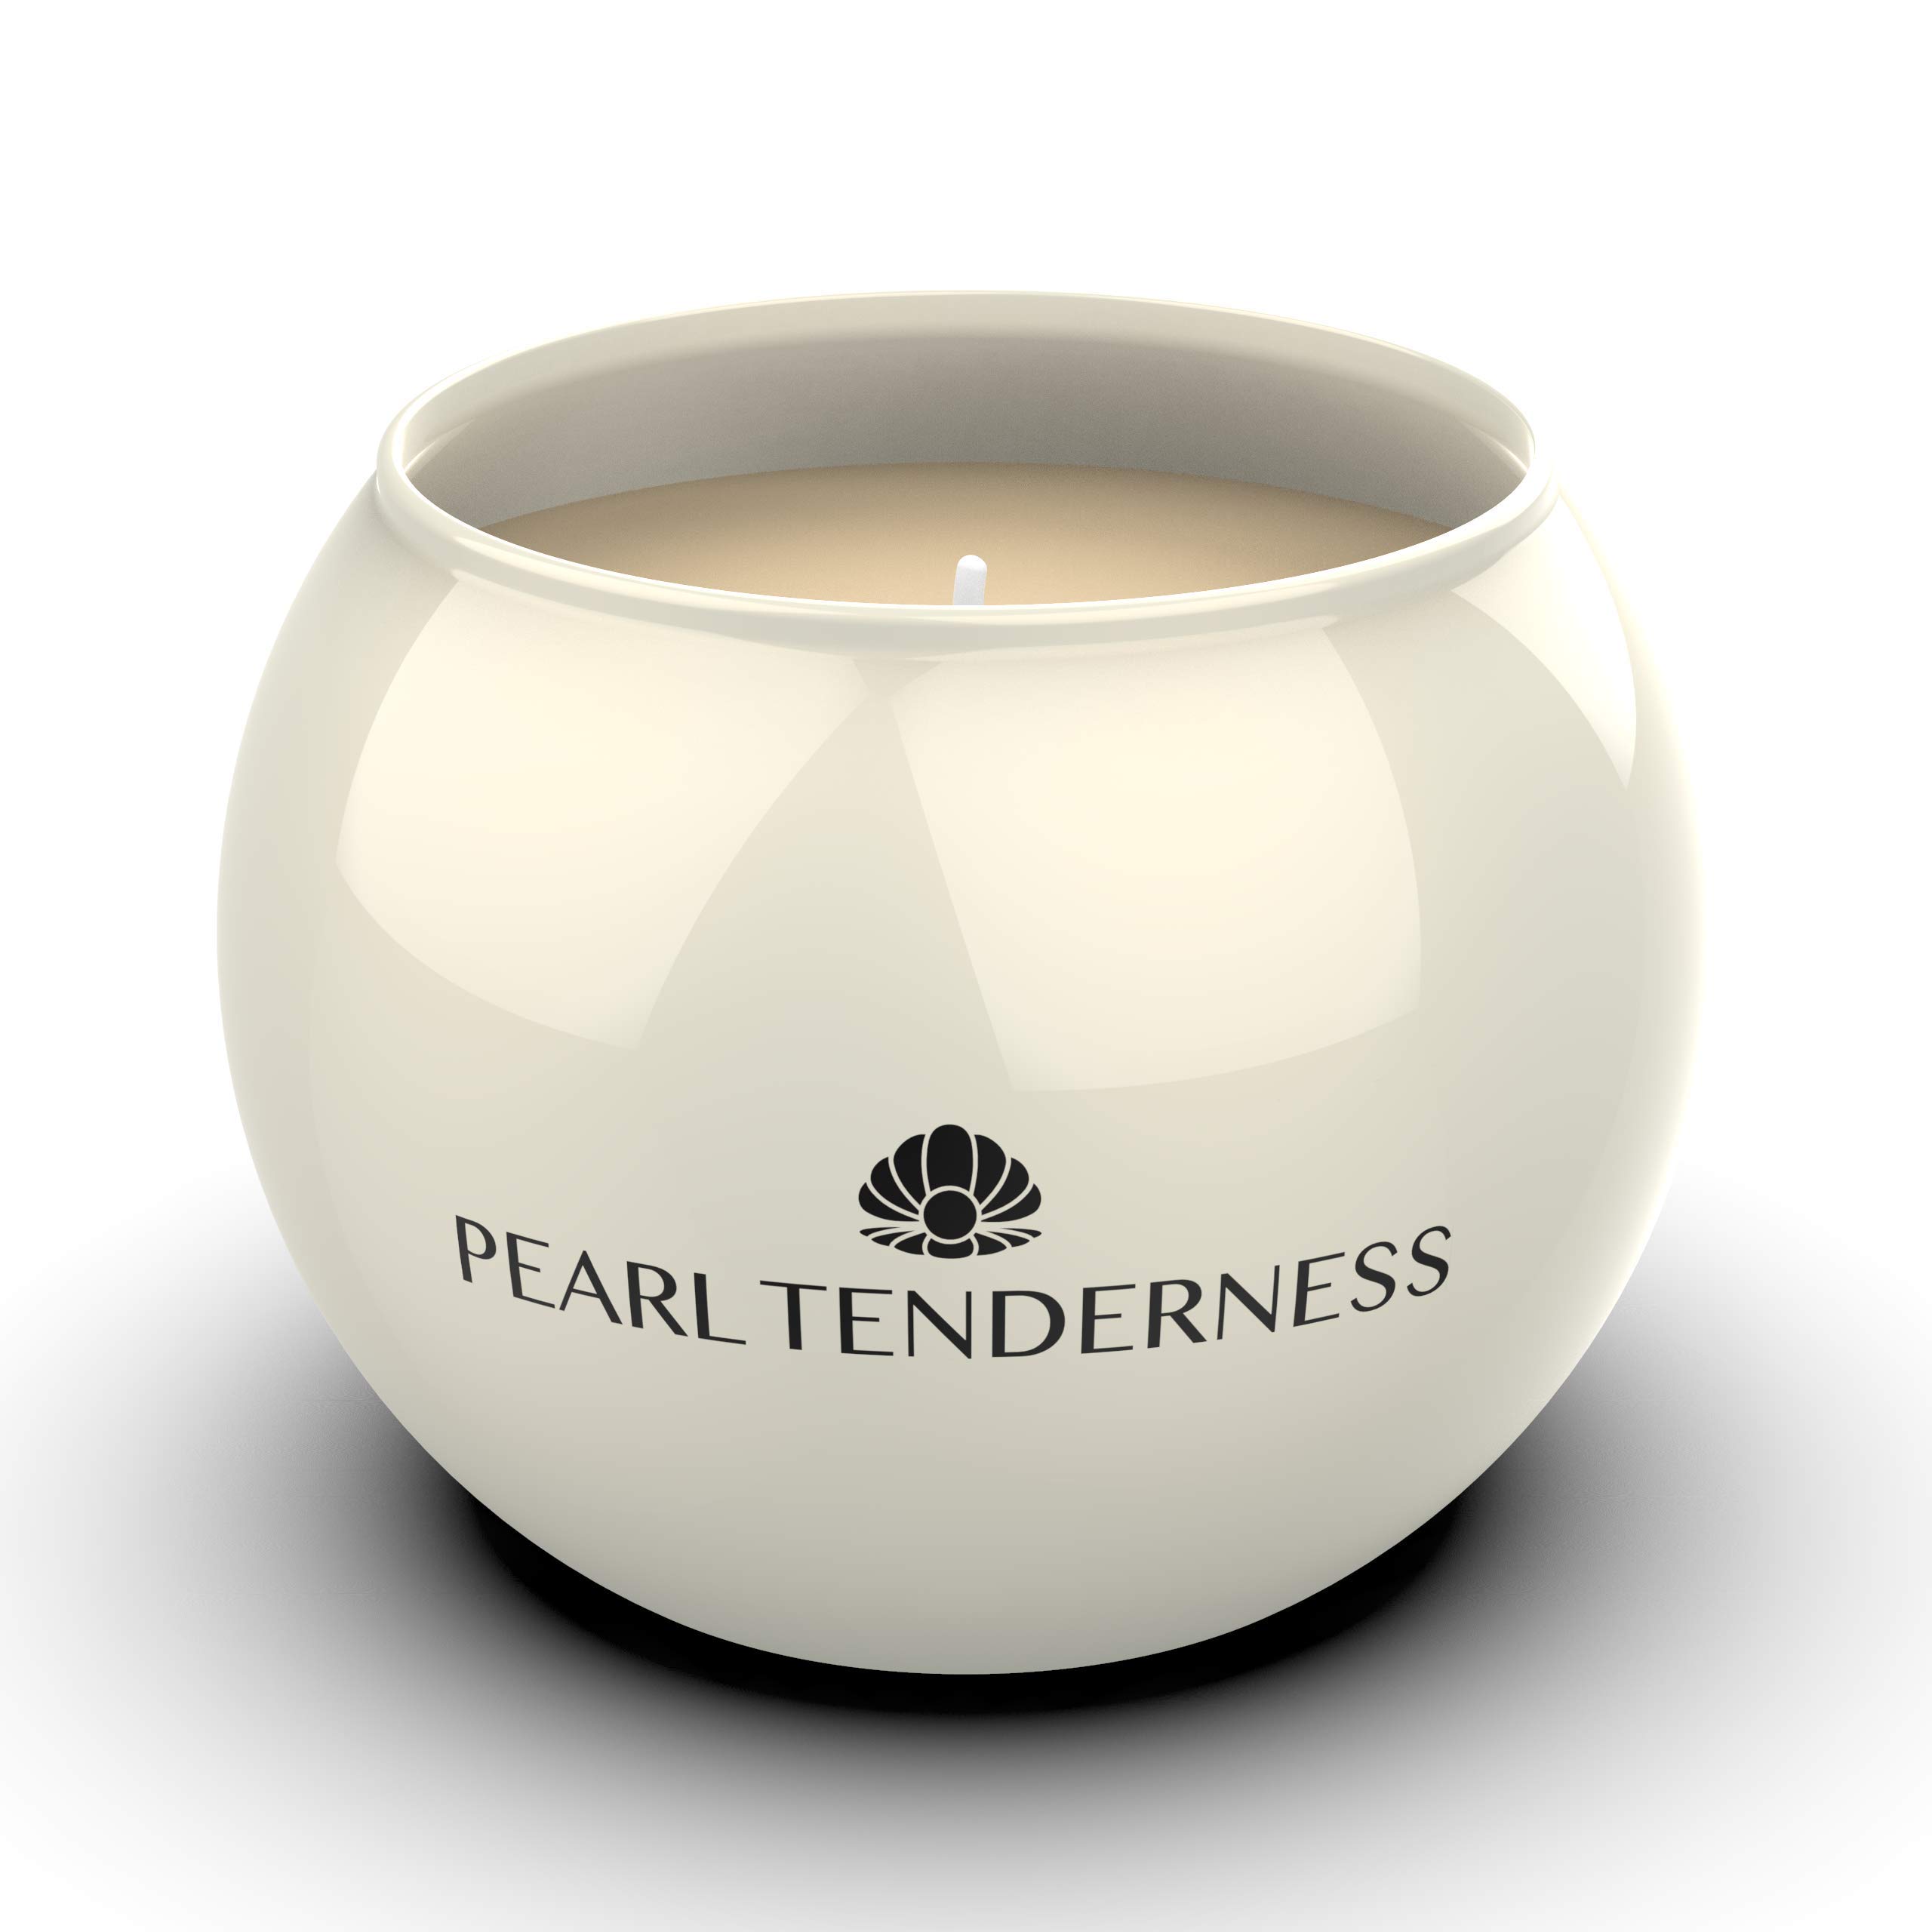 Book Cover Scented Candles, White Pearl All Natural Soy Candles Strong Fragrance of English pear Candle Premium Pearl Finish Candles Glass Gift Boxed Home Decor Aromatherapy Candles